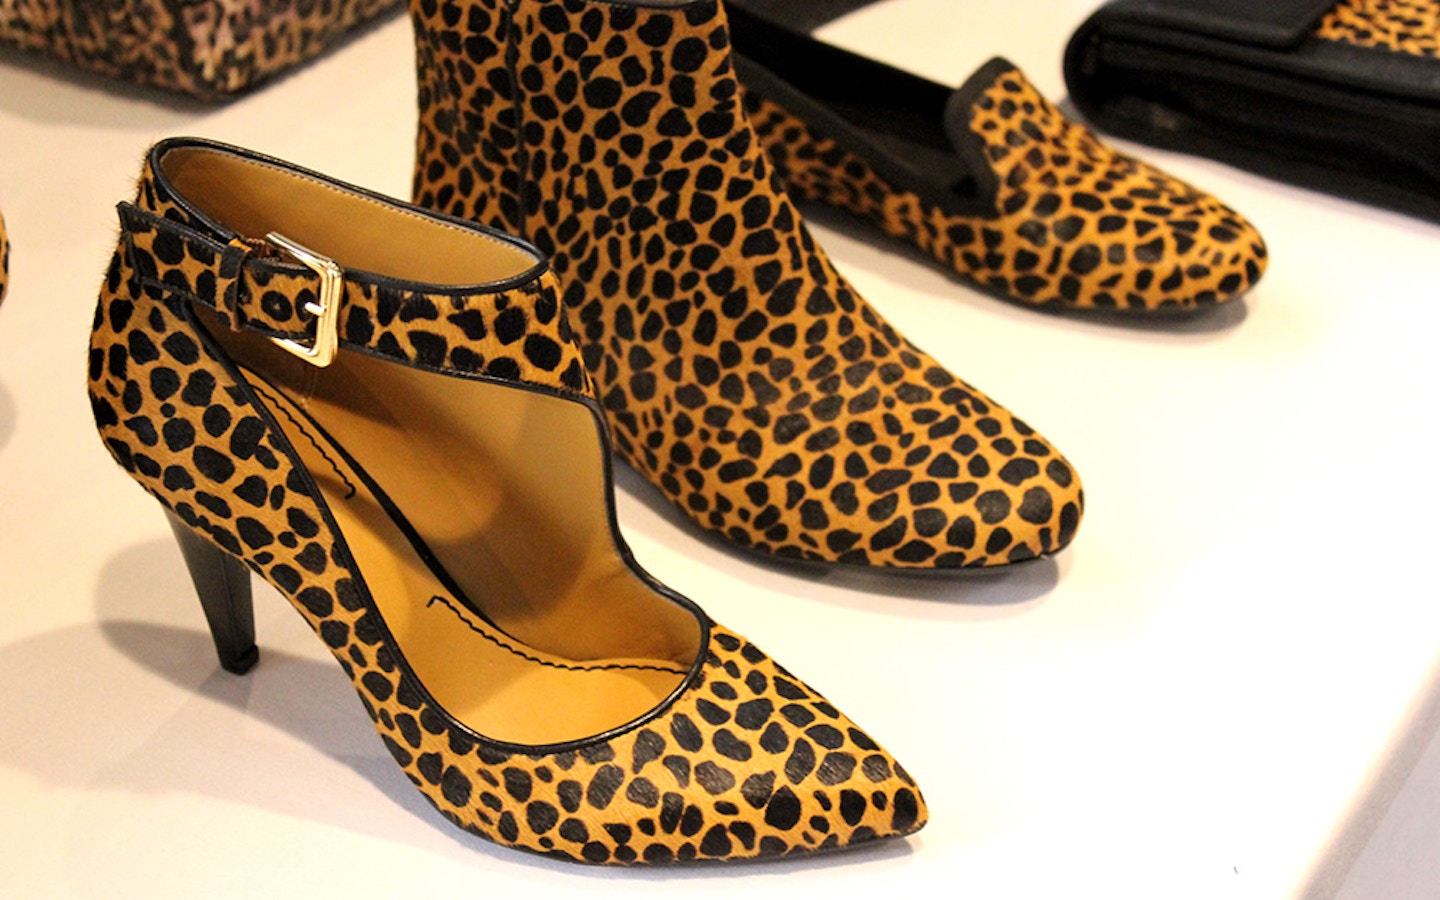 Nine West Fall 2013 Shoe Collection Preview